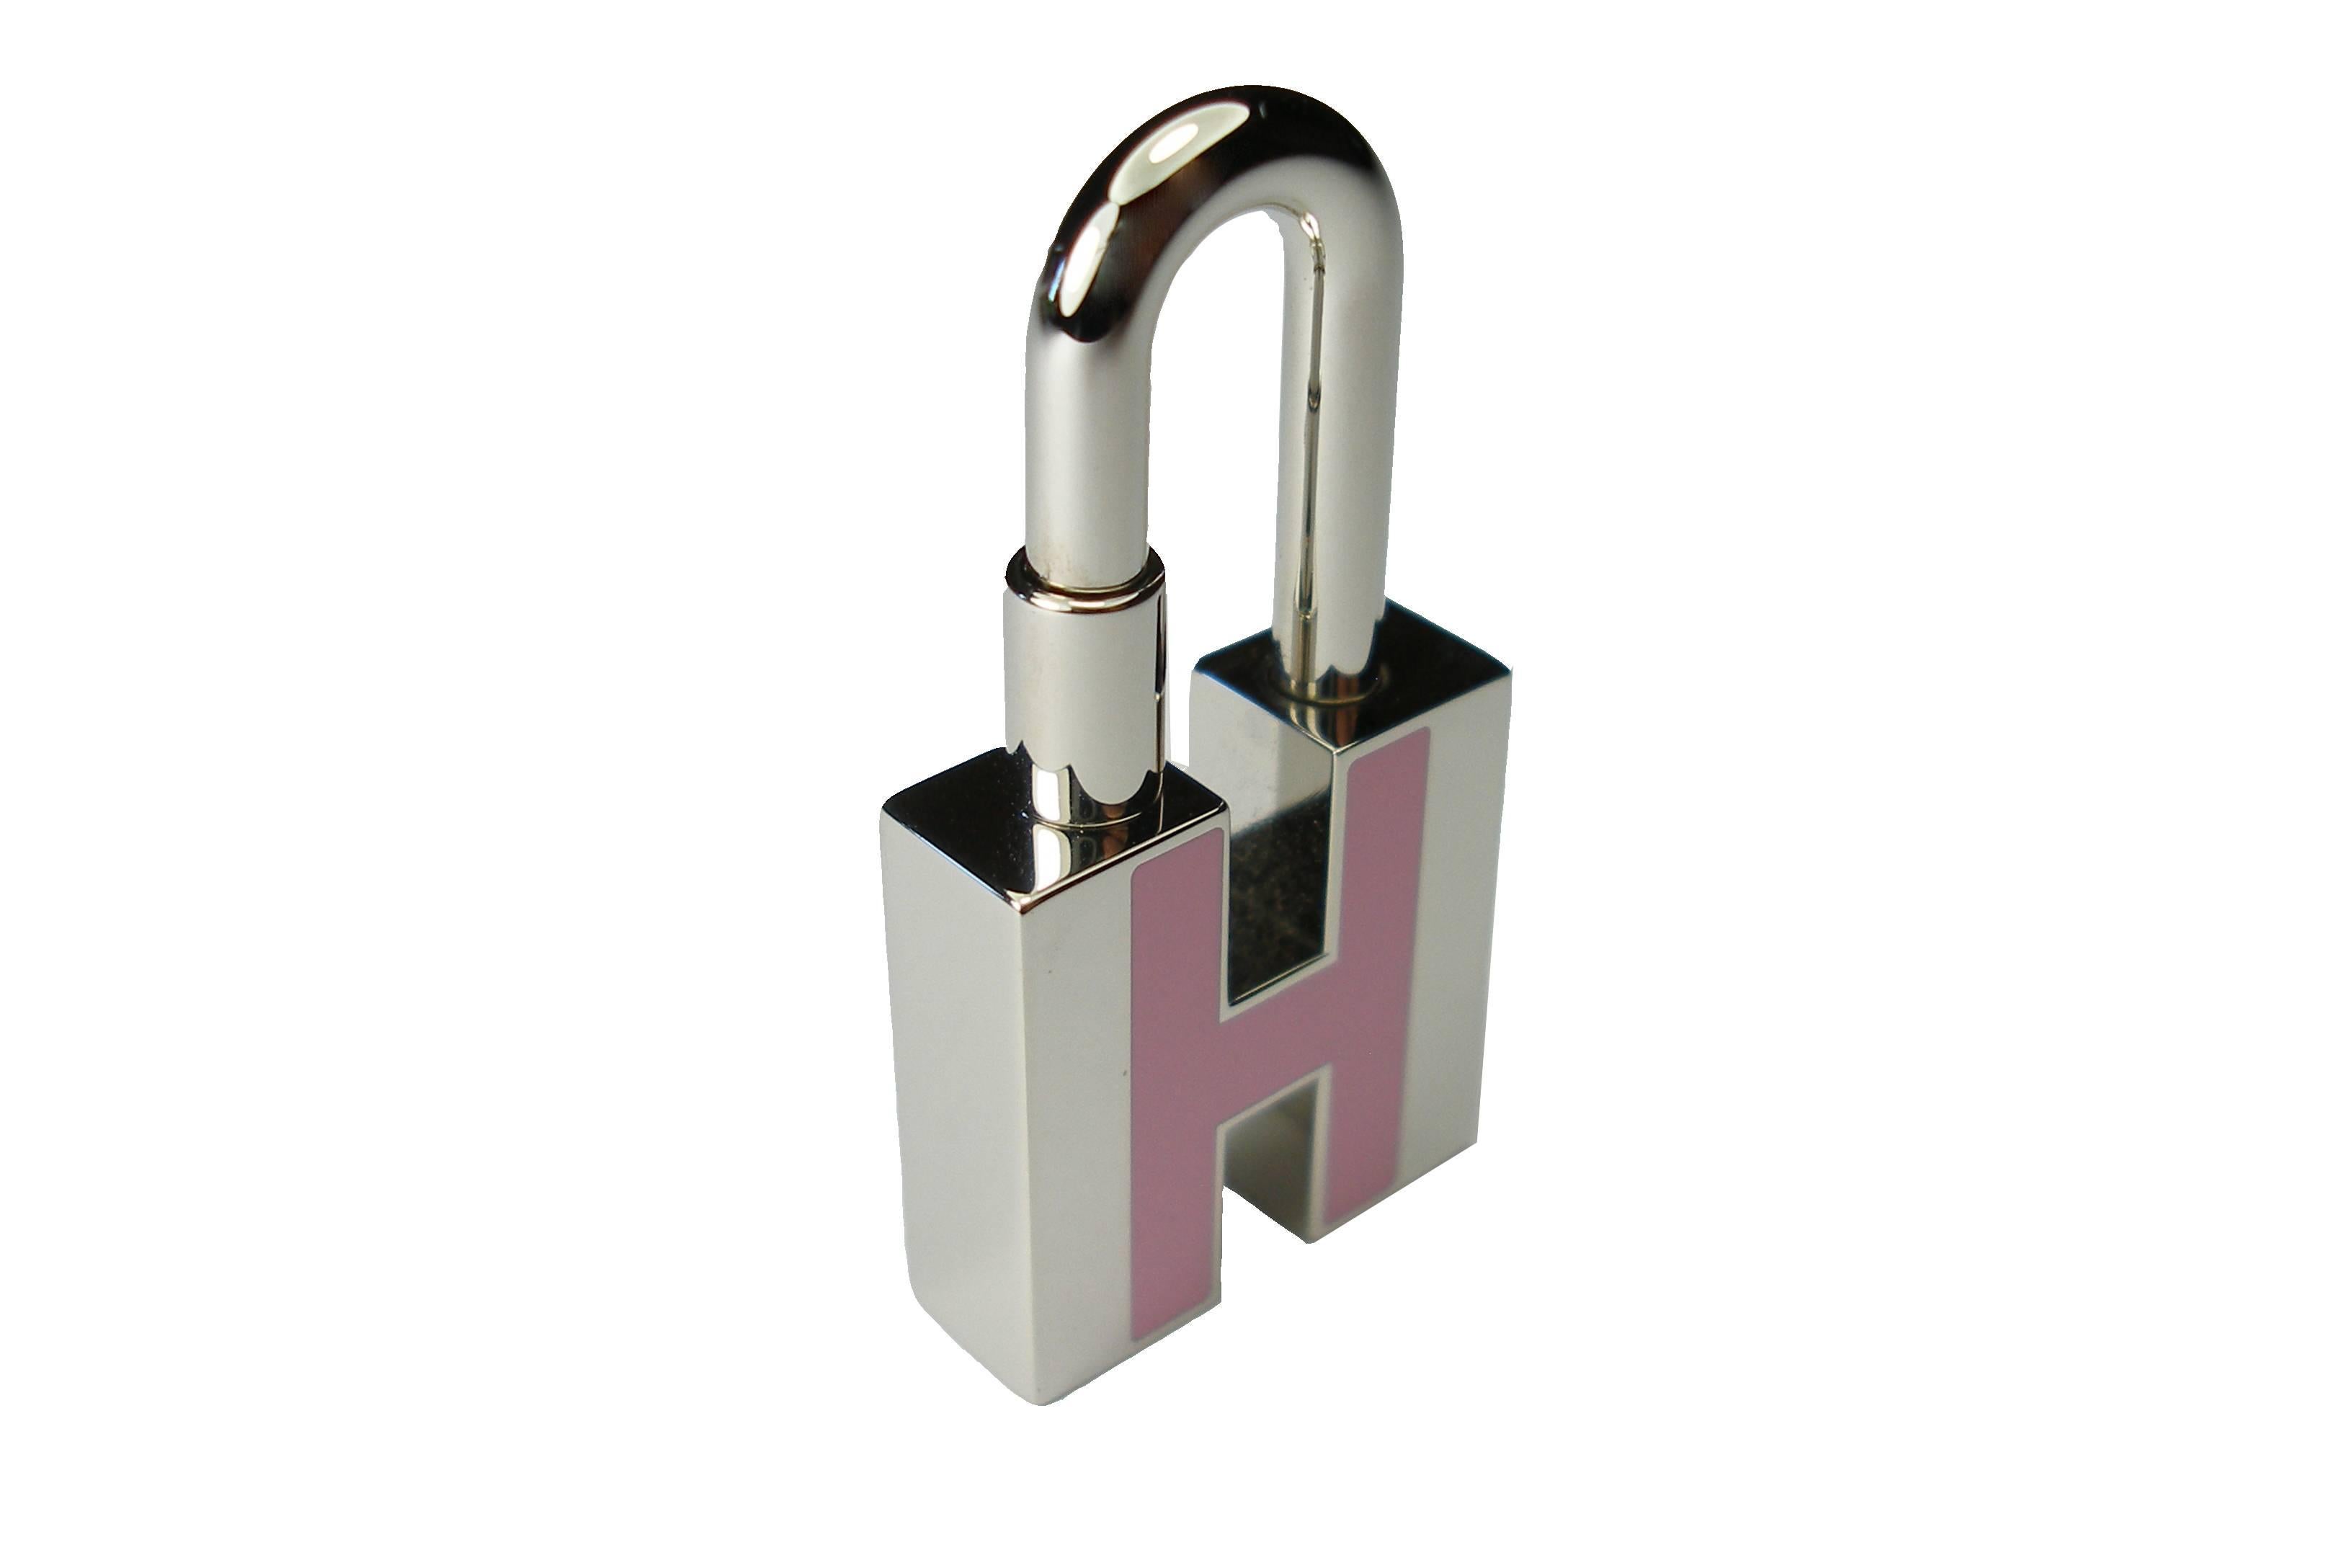 Rare Pink Enamel and Palladium Lock Charm
BRAND NEW 
Dimensions : 2 x 2 cm 
Its comes with Hermès shopping bag and ribbon 
INTERNATIONALS BUYERS CUSTOMS DUTIES AND TAXES ARE INCLUDED
Thank you for visiting my shop !